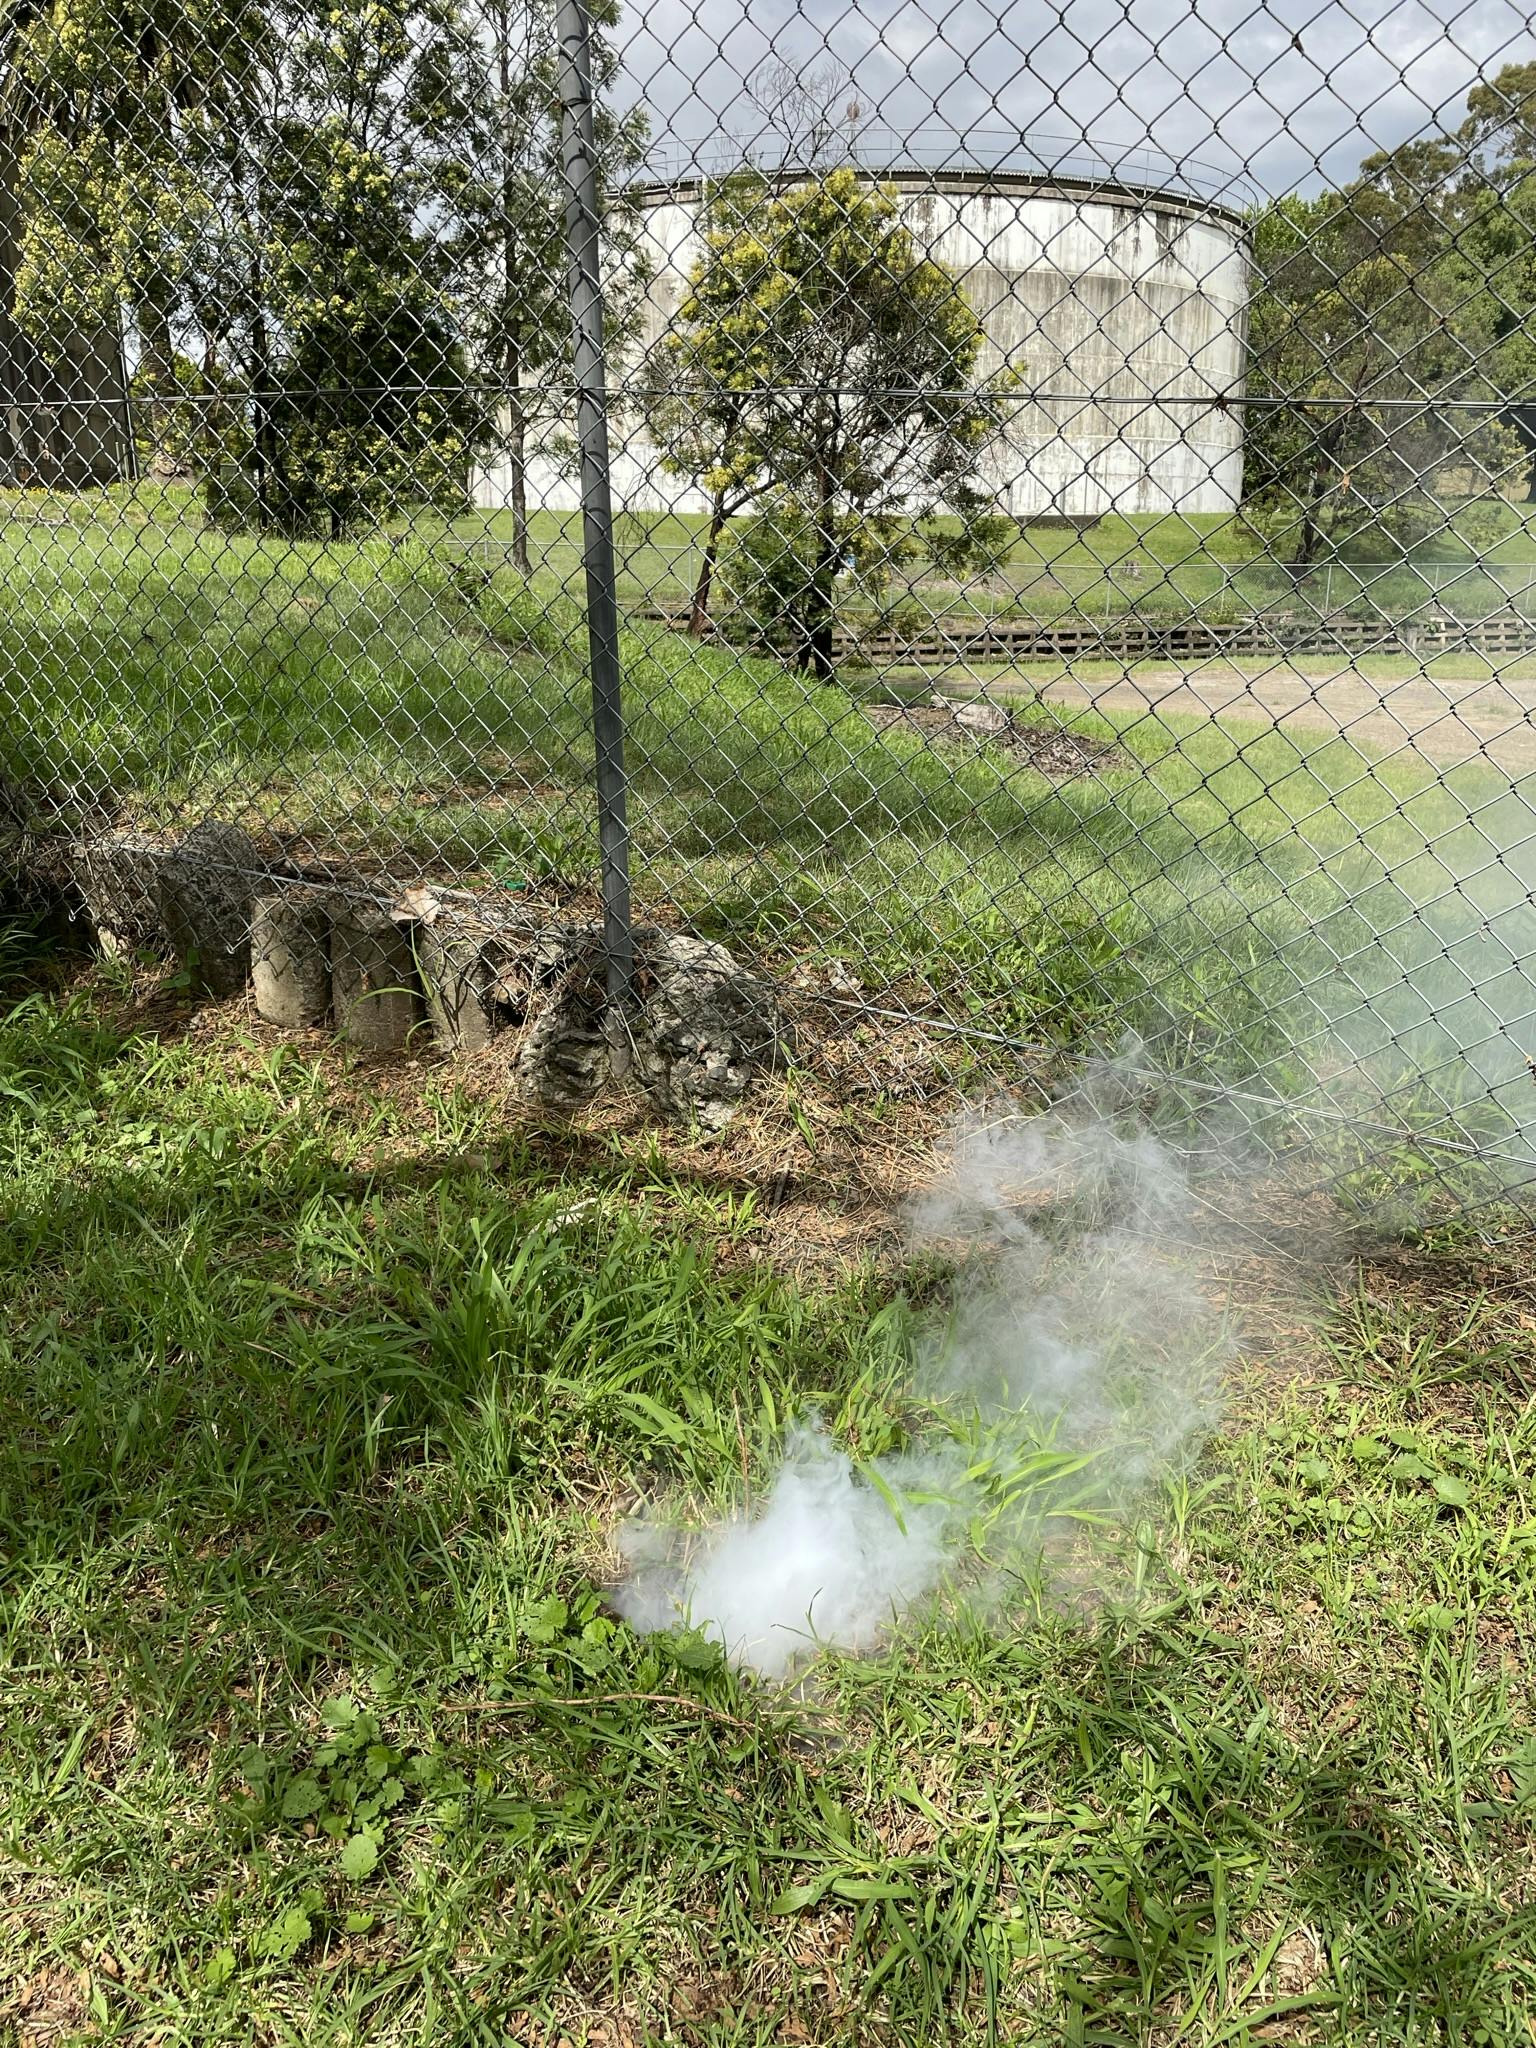 Smoke coming from the ground indicates a damaged pipe or joints underground